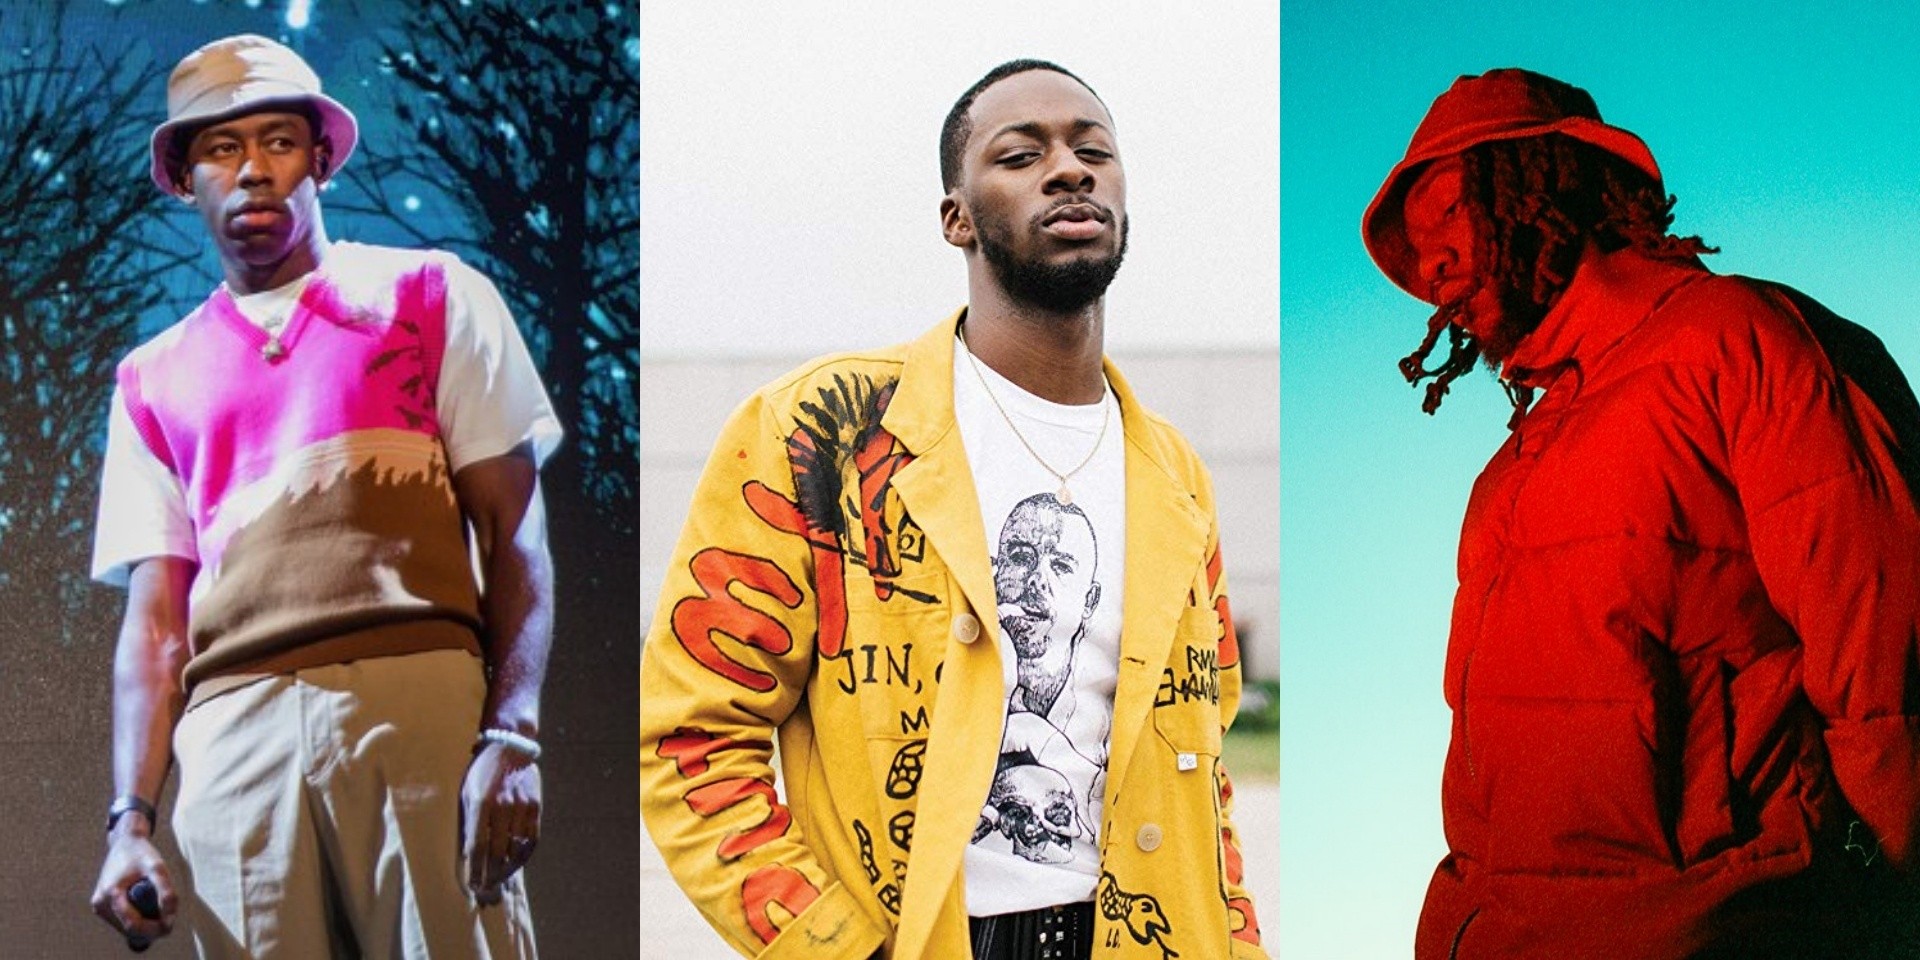 GoldLink releases groovy new song ‘U Say’ feat. Tyler, The Creator, Jay Prince – listen